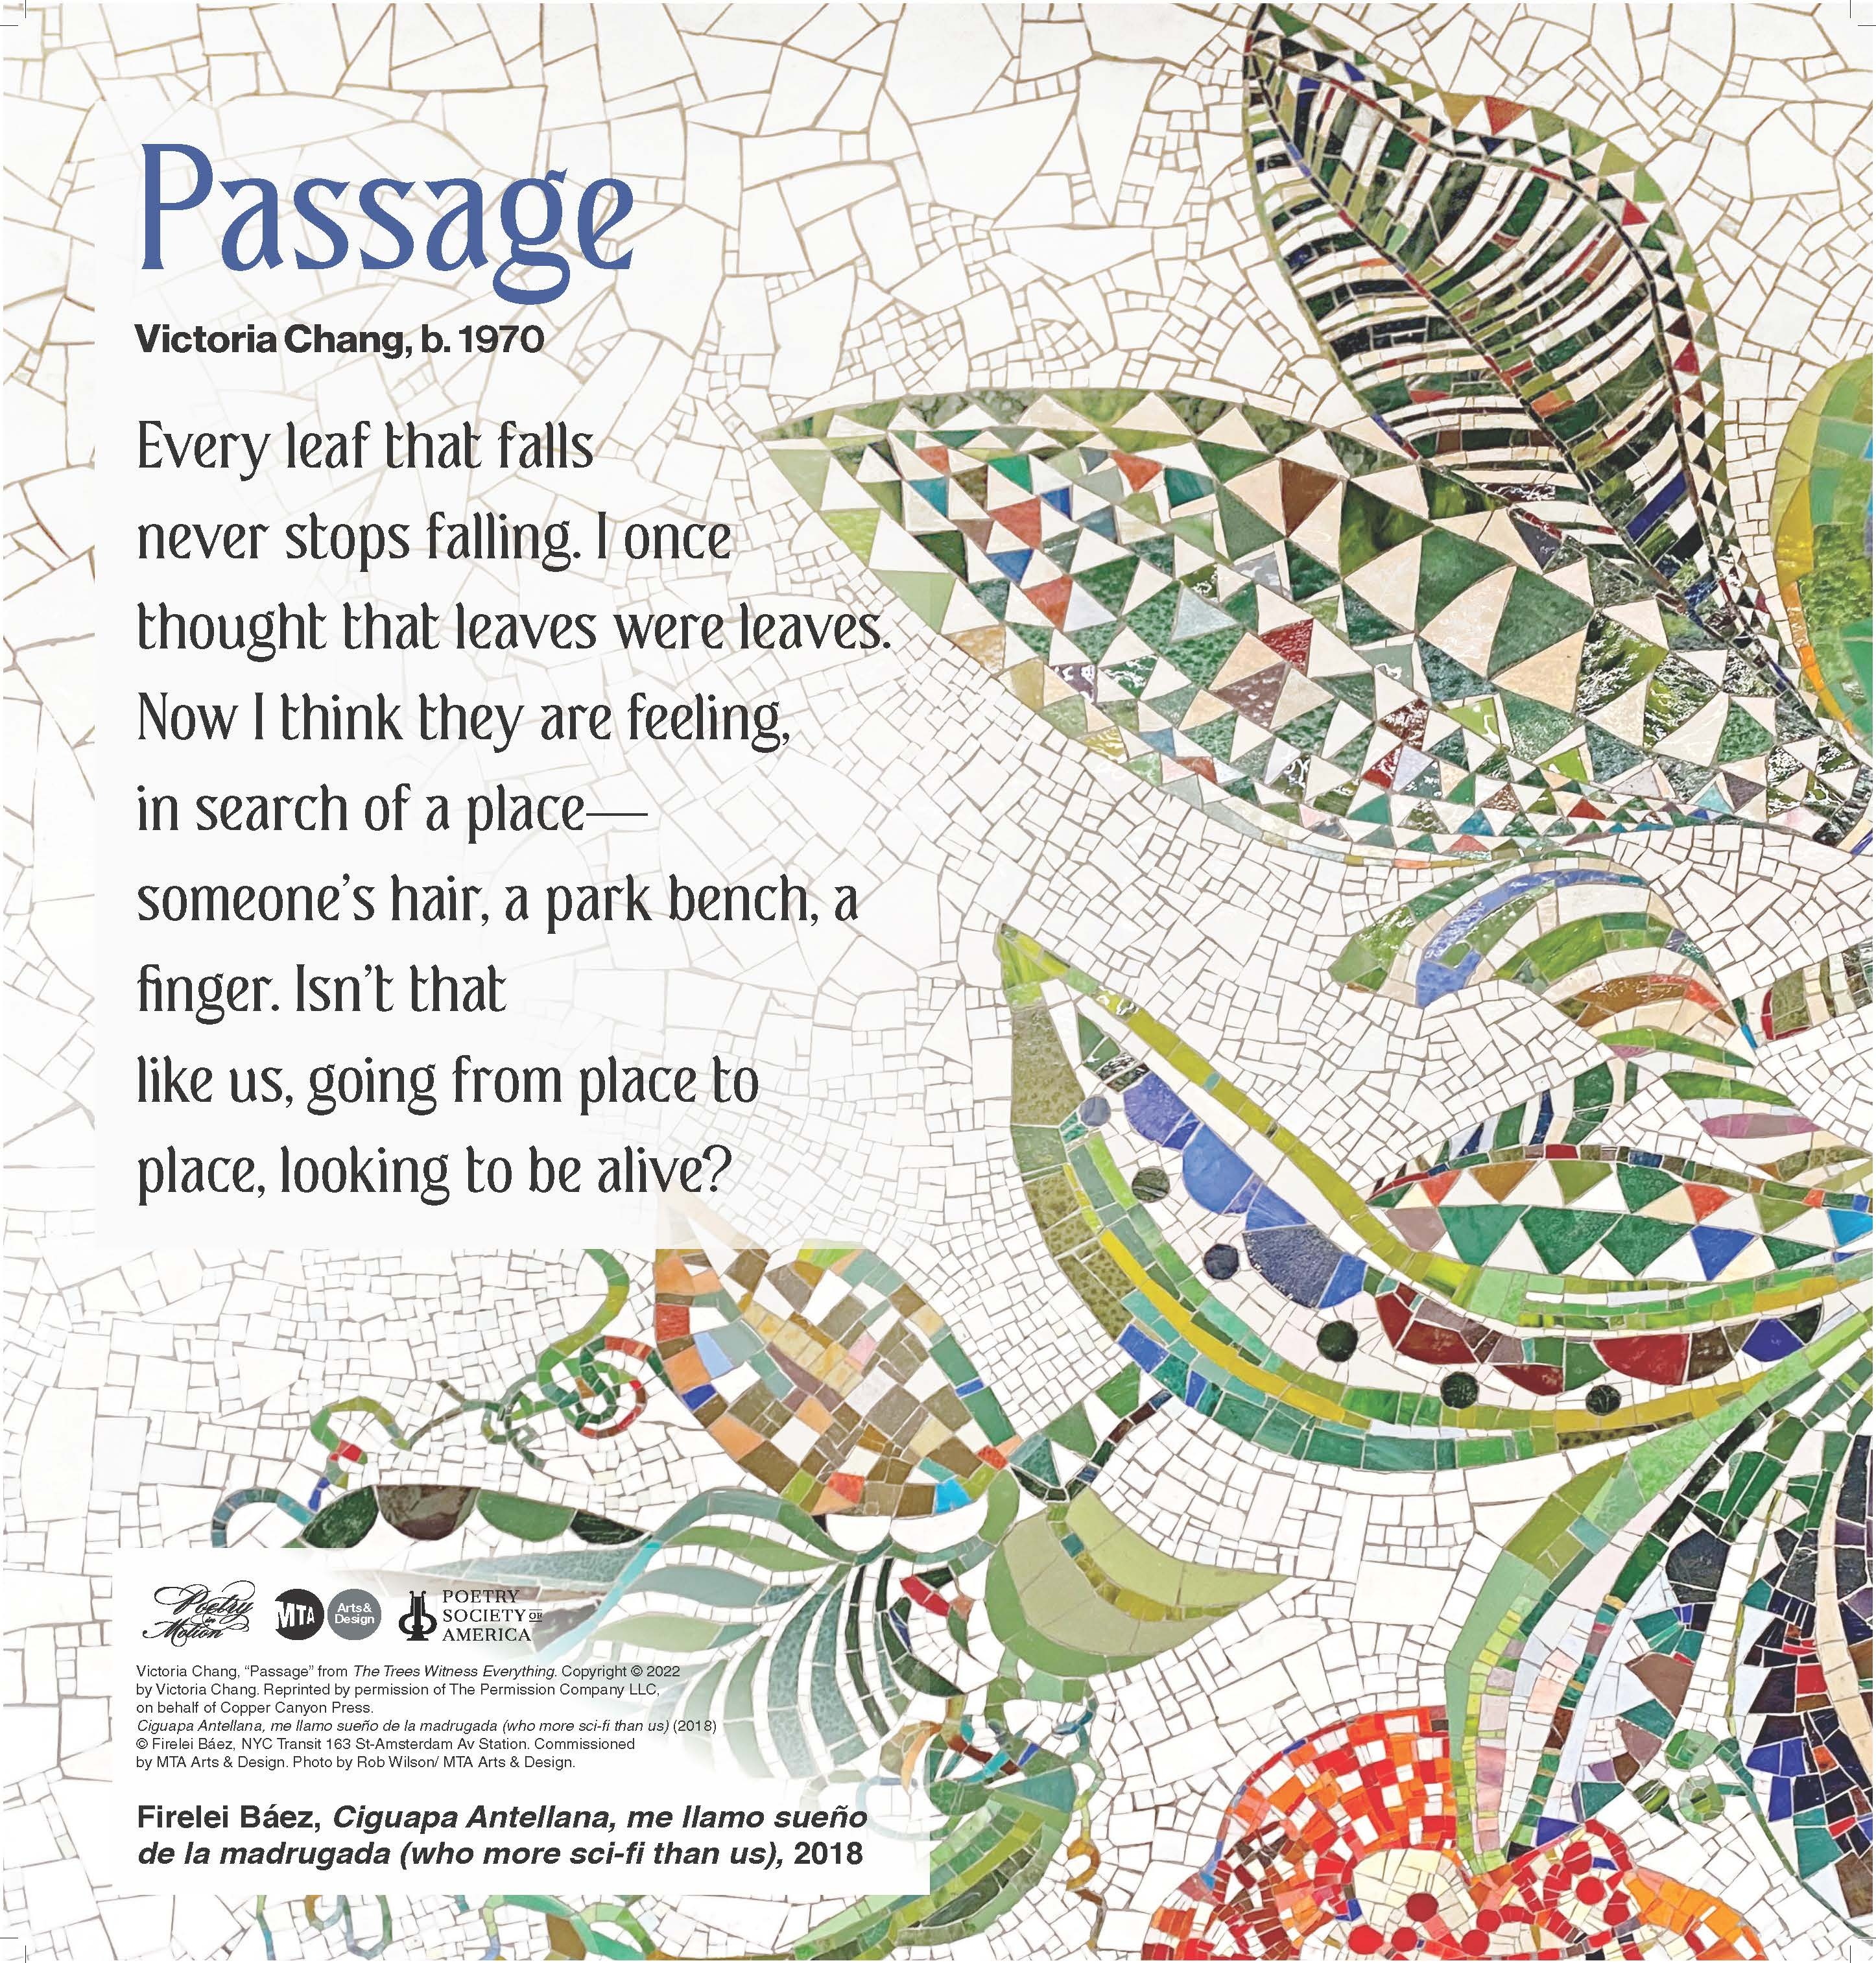 A poster of a glass mosaic artwork by Firelei Báez depicts a lush nature scene of leaves and vines. The poem, Passage by Victoria Chang, is featured in black text.